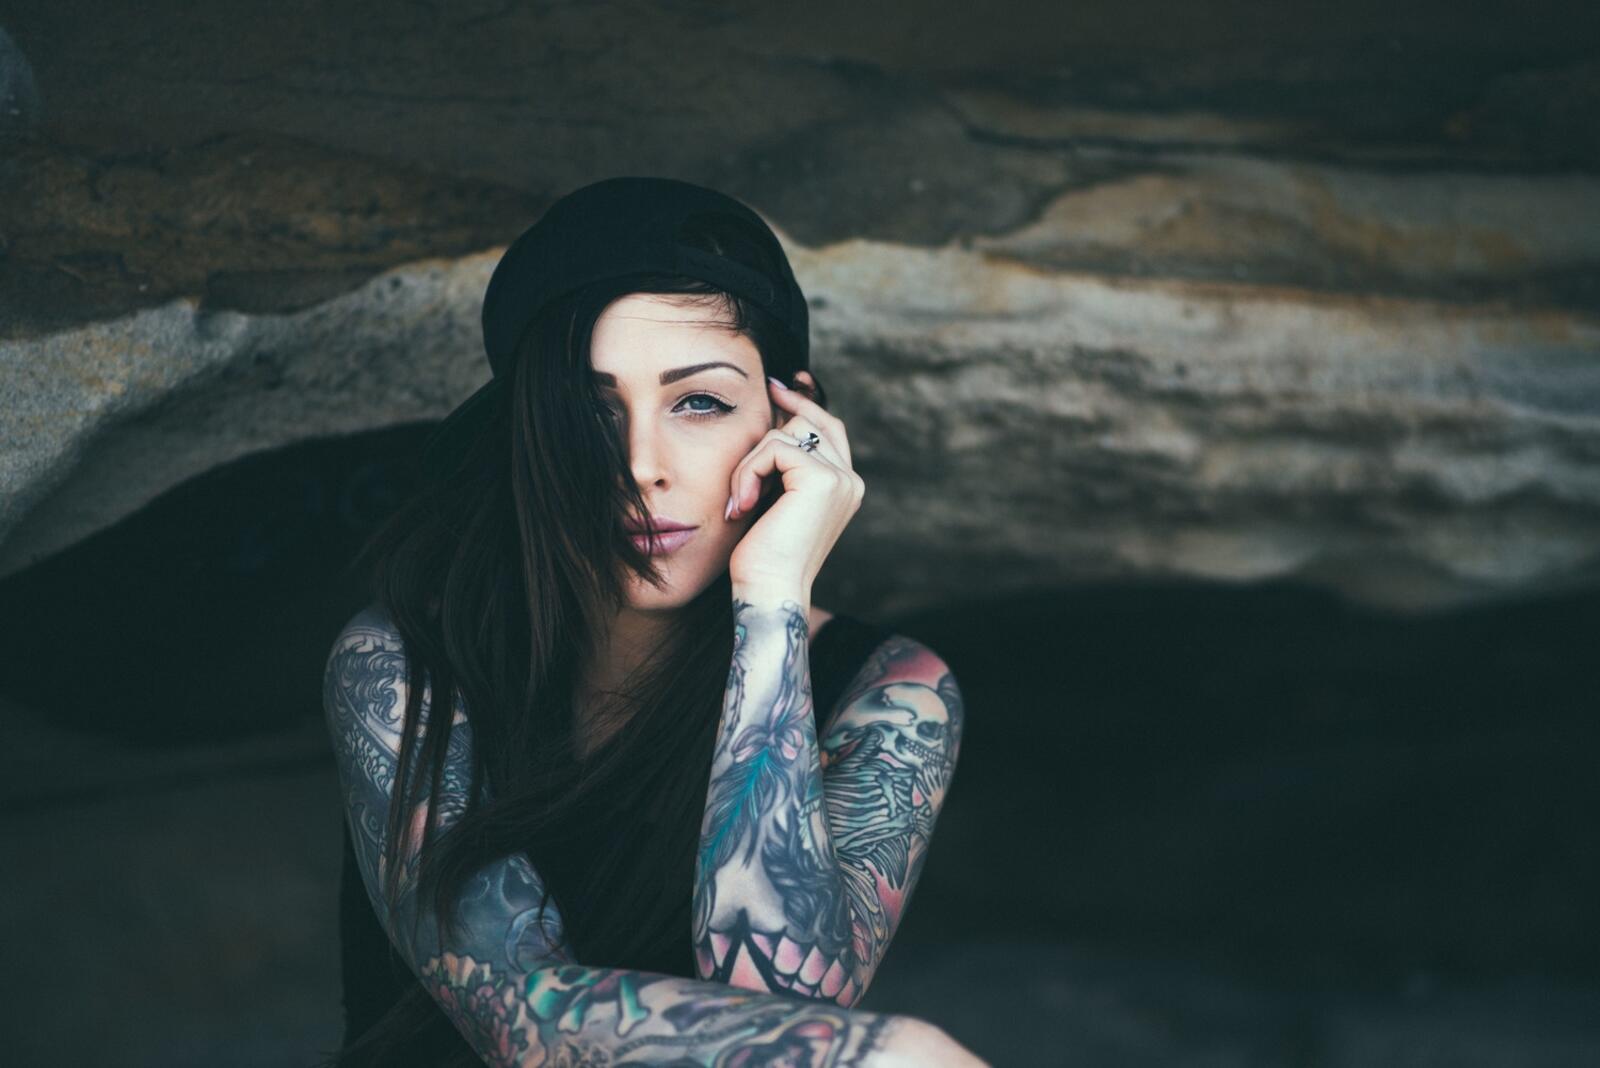 Free photo Brunette with a tattoo Chelsey Macwatts